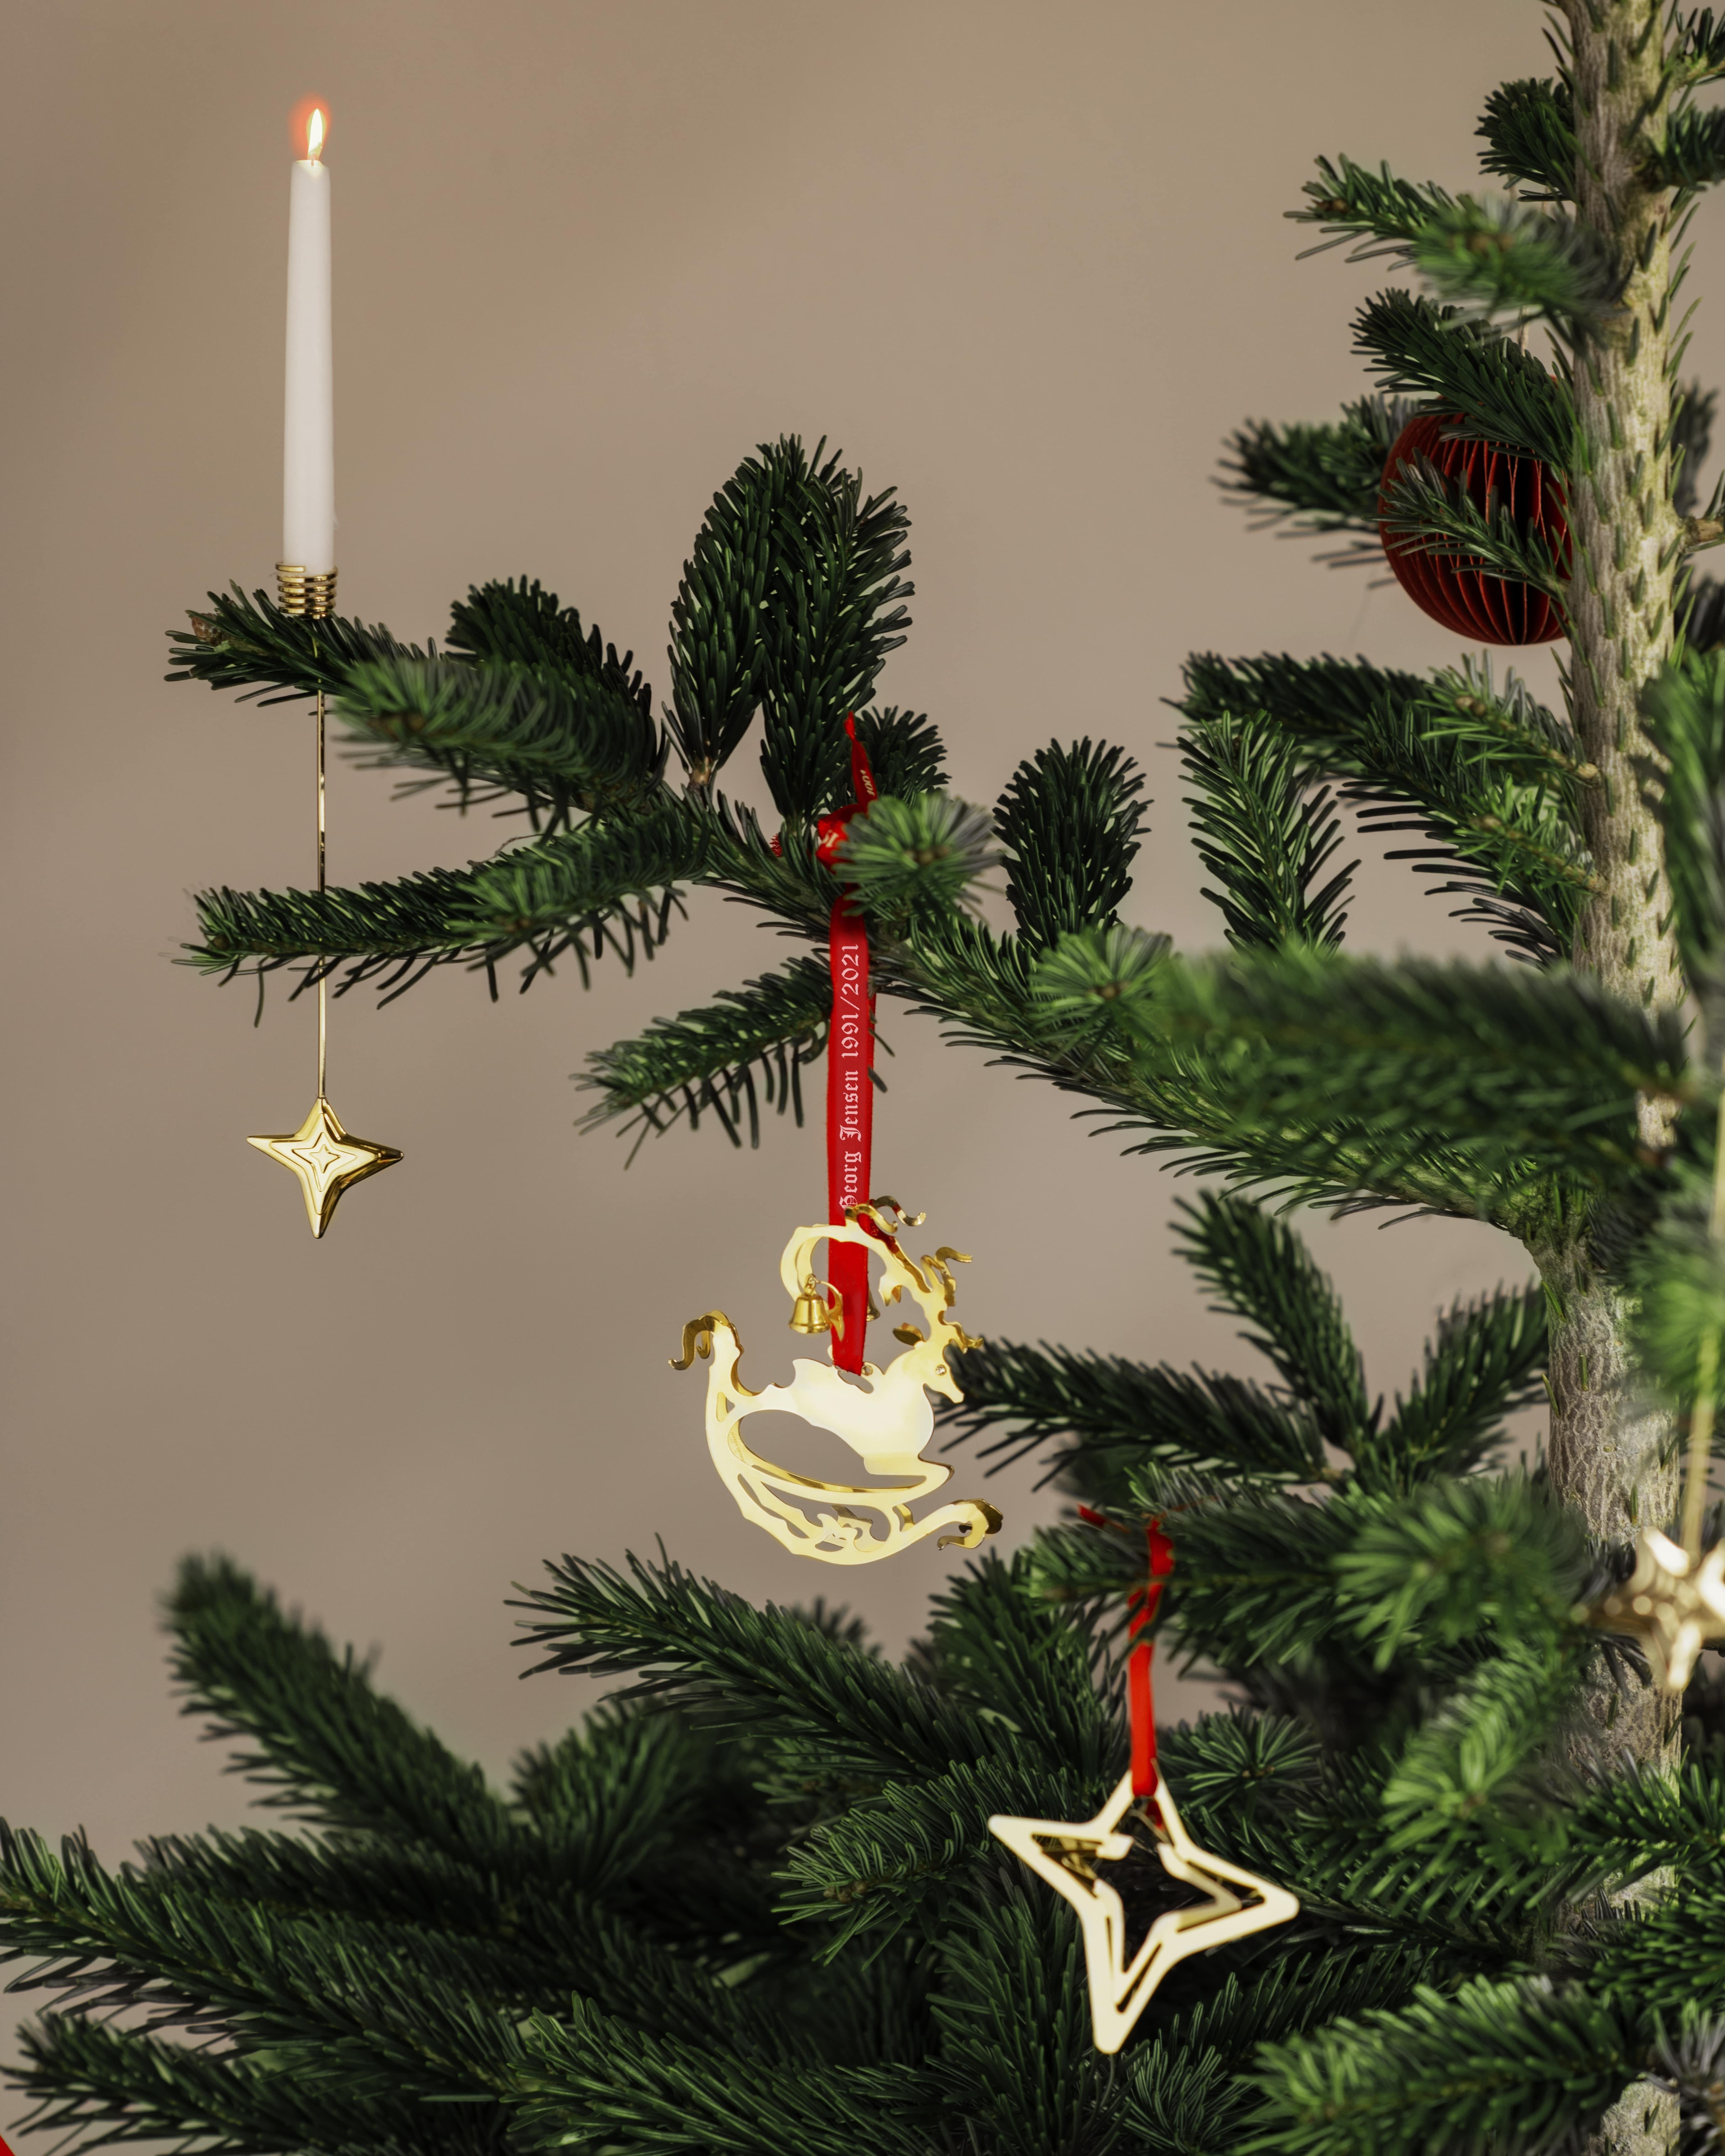 A special mobile re-released to celebrate thirty years of Georg Jensen Christmas Collectibles; this contemporary version of a traditional Christmas deer, complete with bells on its antlers, would be a beautiful addition to any collection of